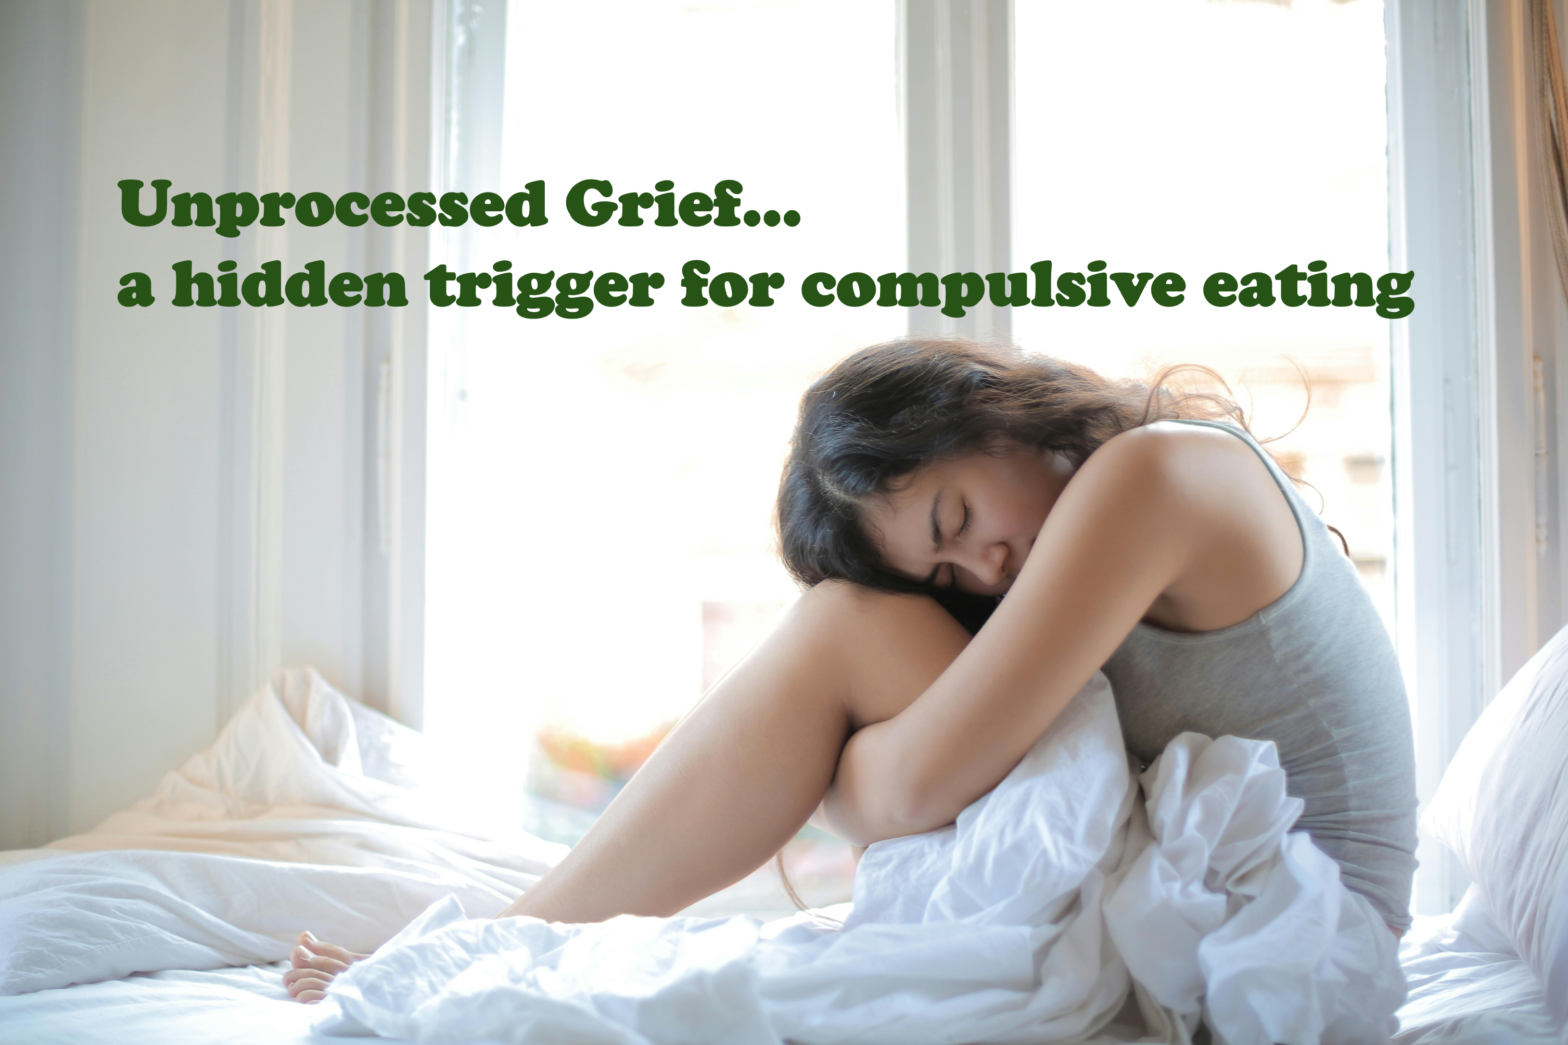 Unprocessed grief can be a hidden trigger for compulsive eating